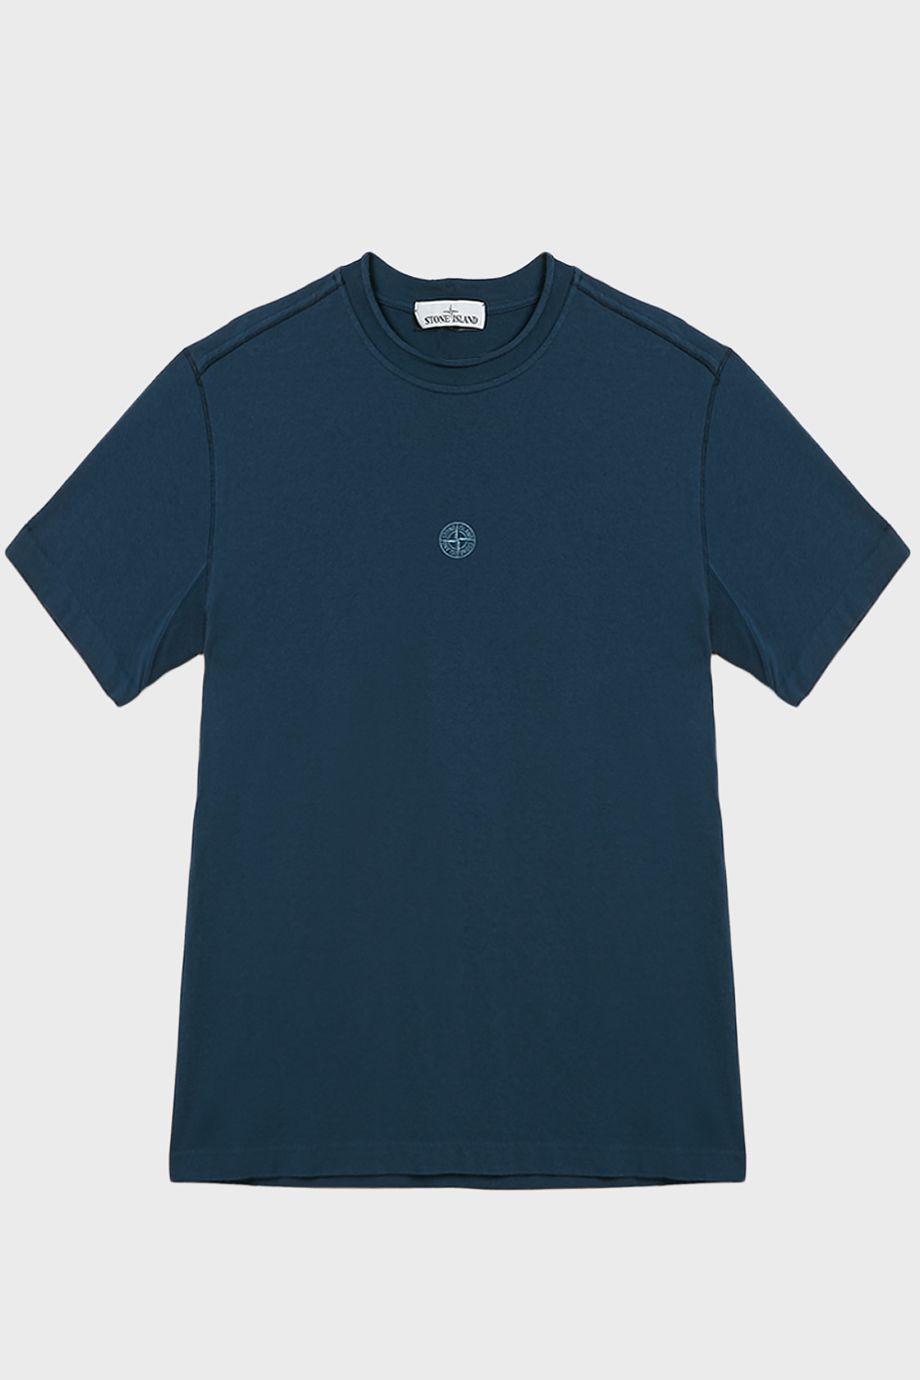 Stone Island Centre Logo Cotton T-shirt in Blue for Men - Lyst